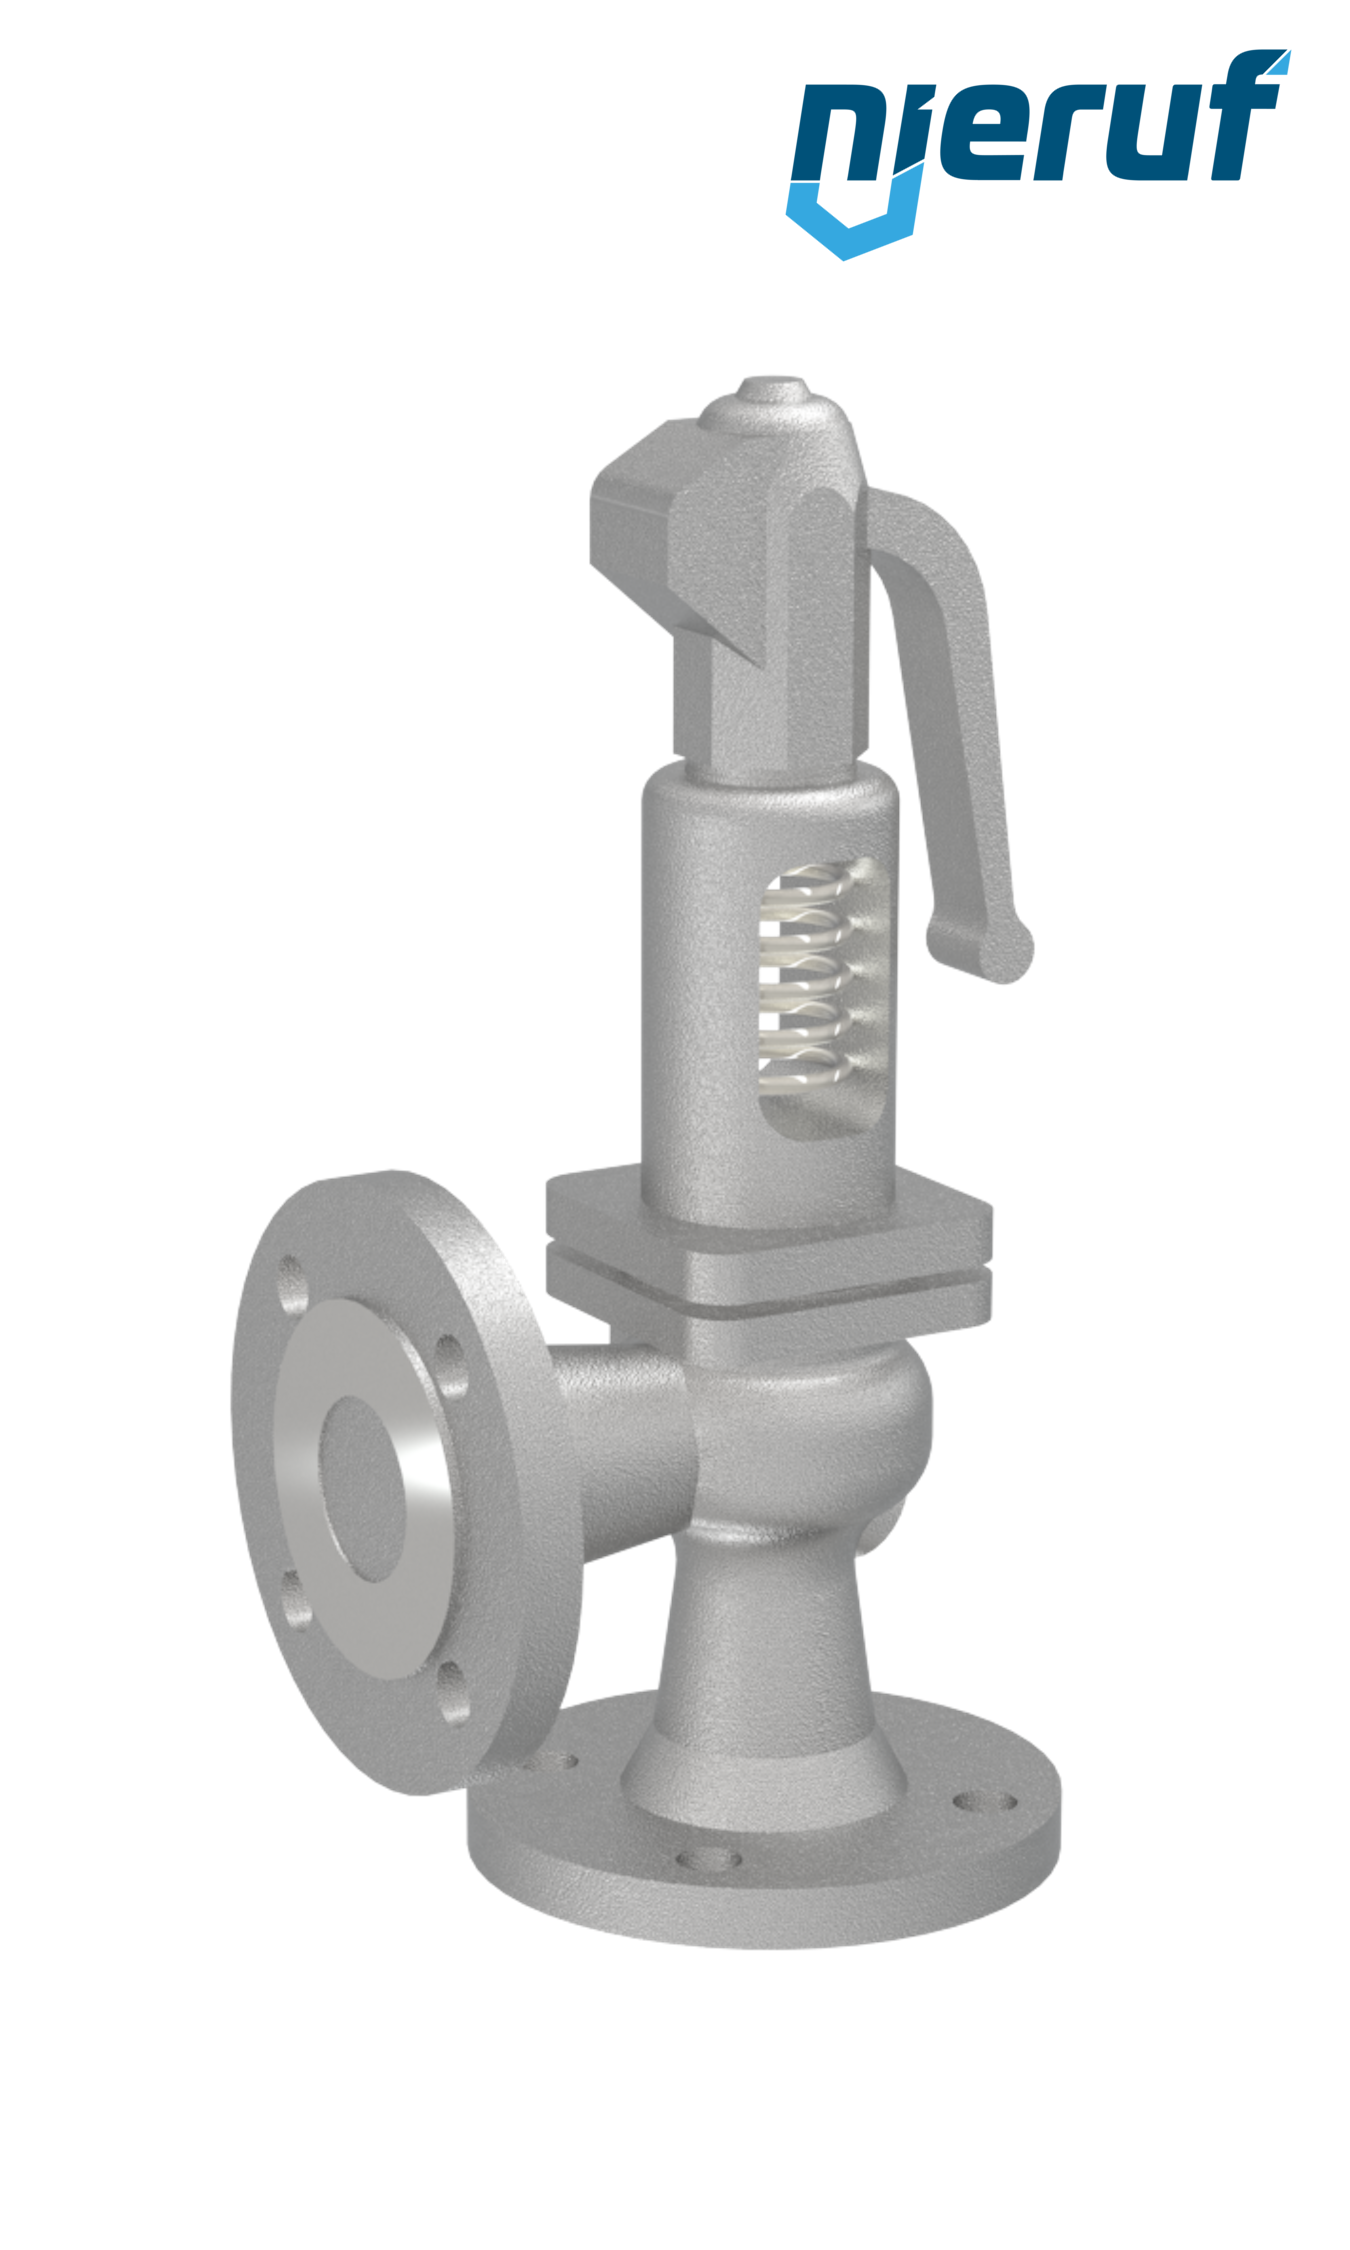 flange-safety valve DN80/DN80 SF0102, cast iron EN-JL1040 metal, with lever